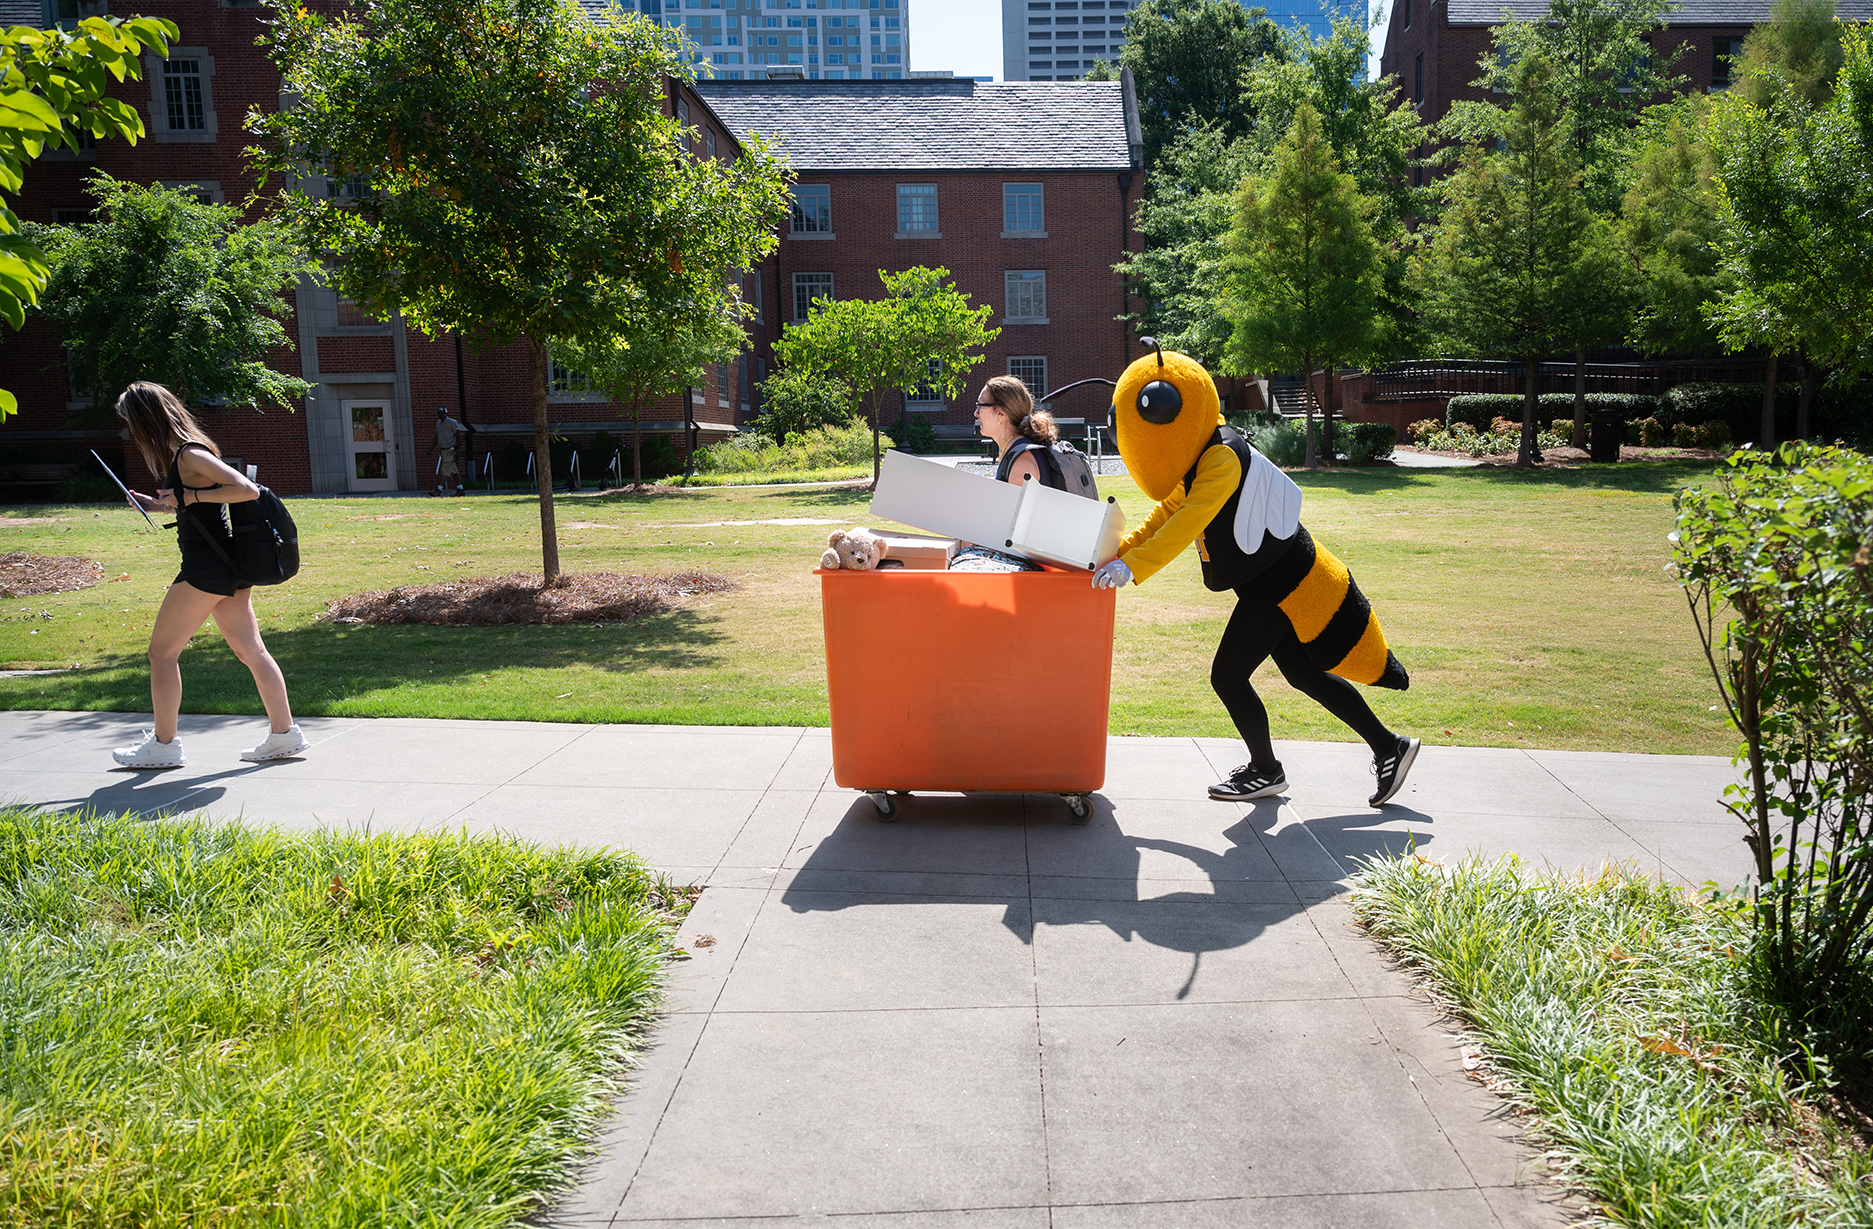 buzz helps with move-in